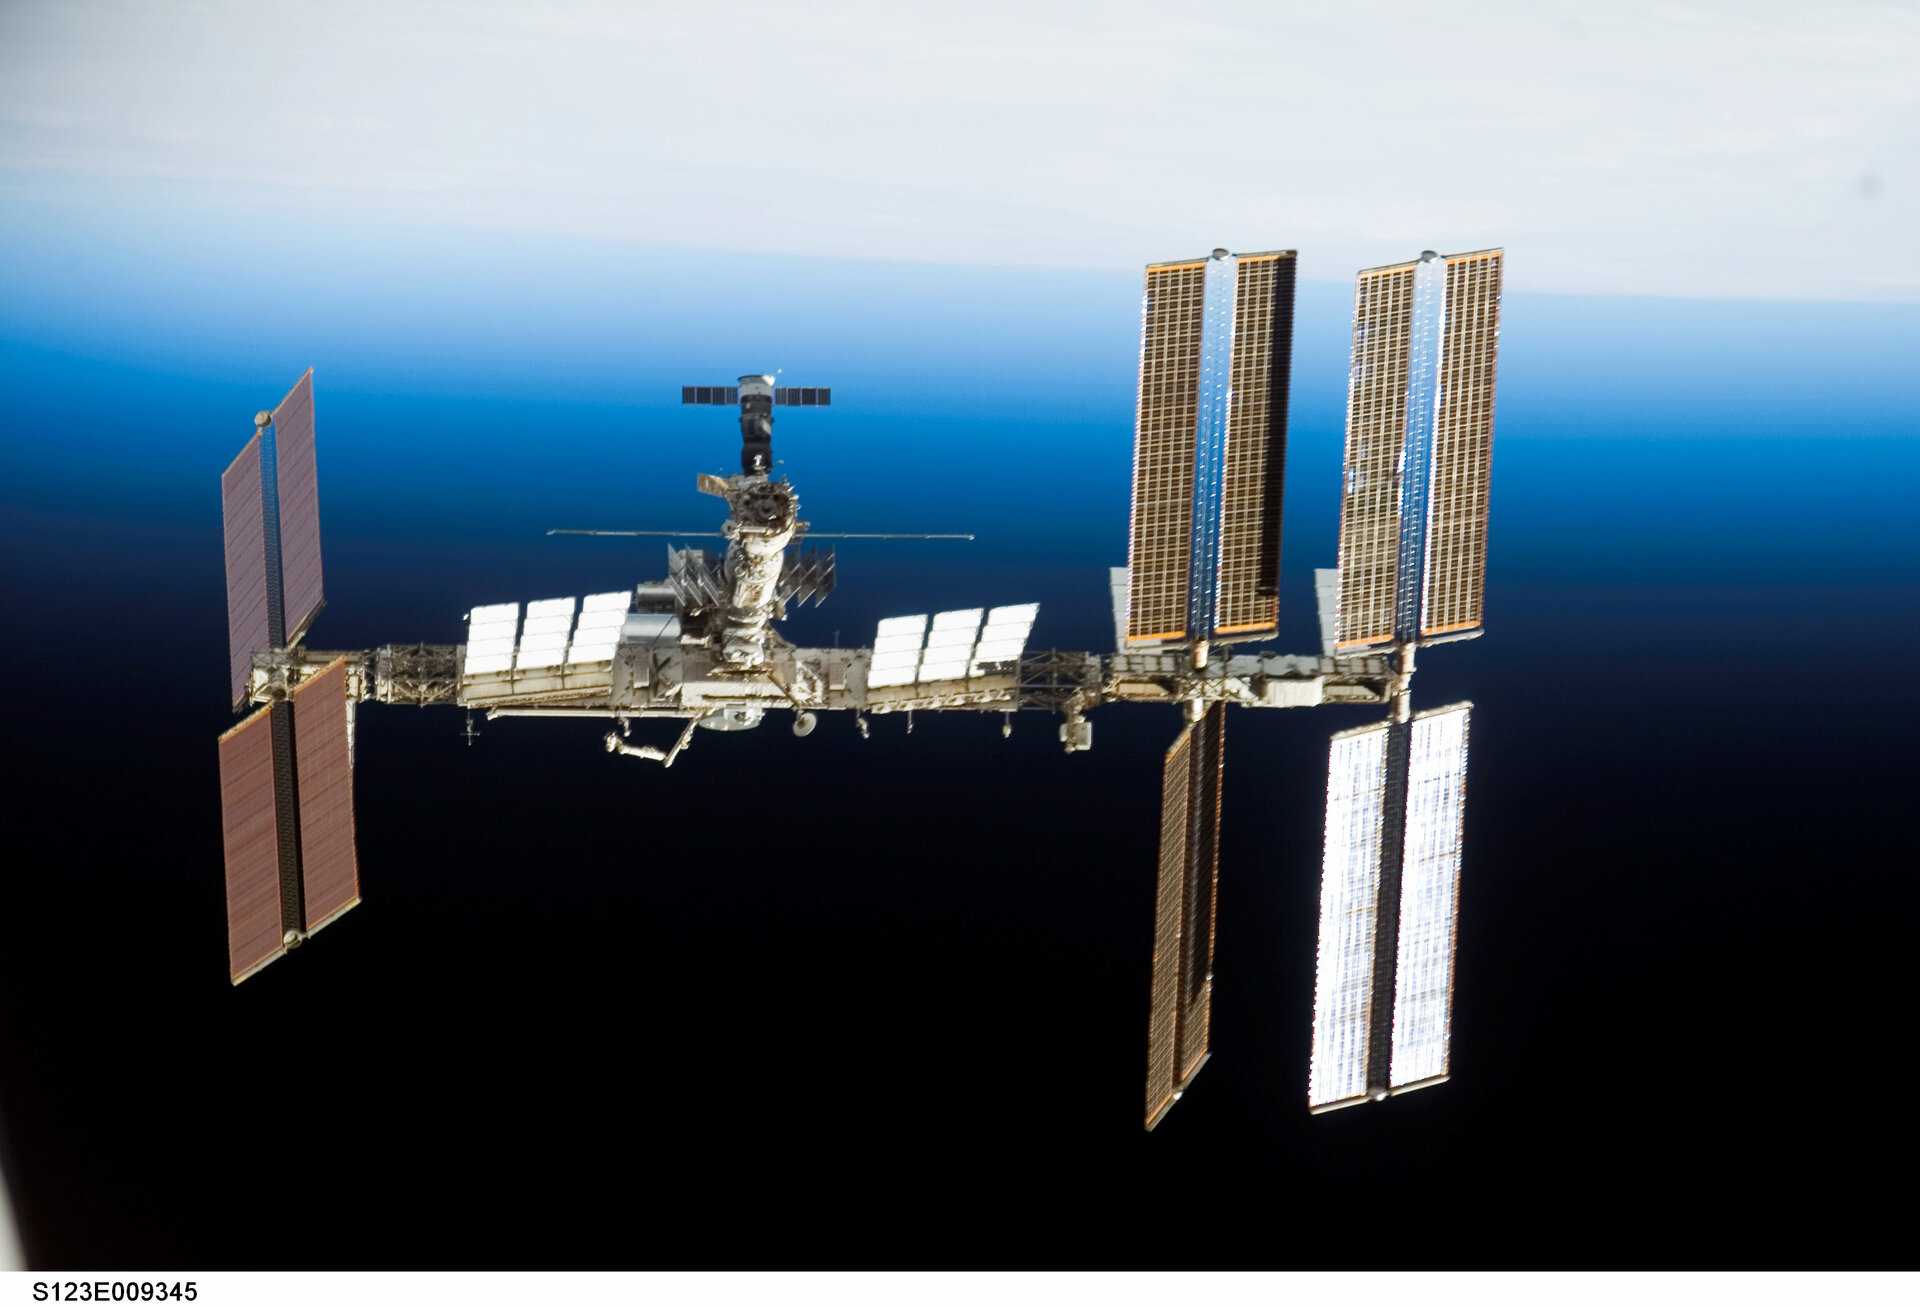 View of the International Space Station following undocking of Space Shuttle Endeavour on the STS-123 mission